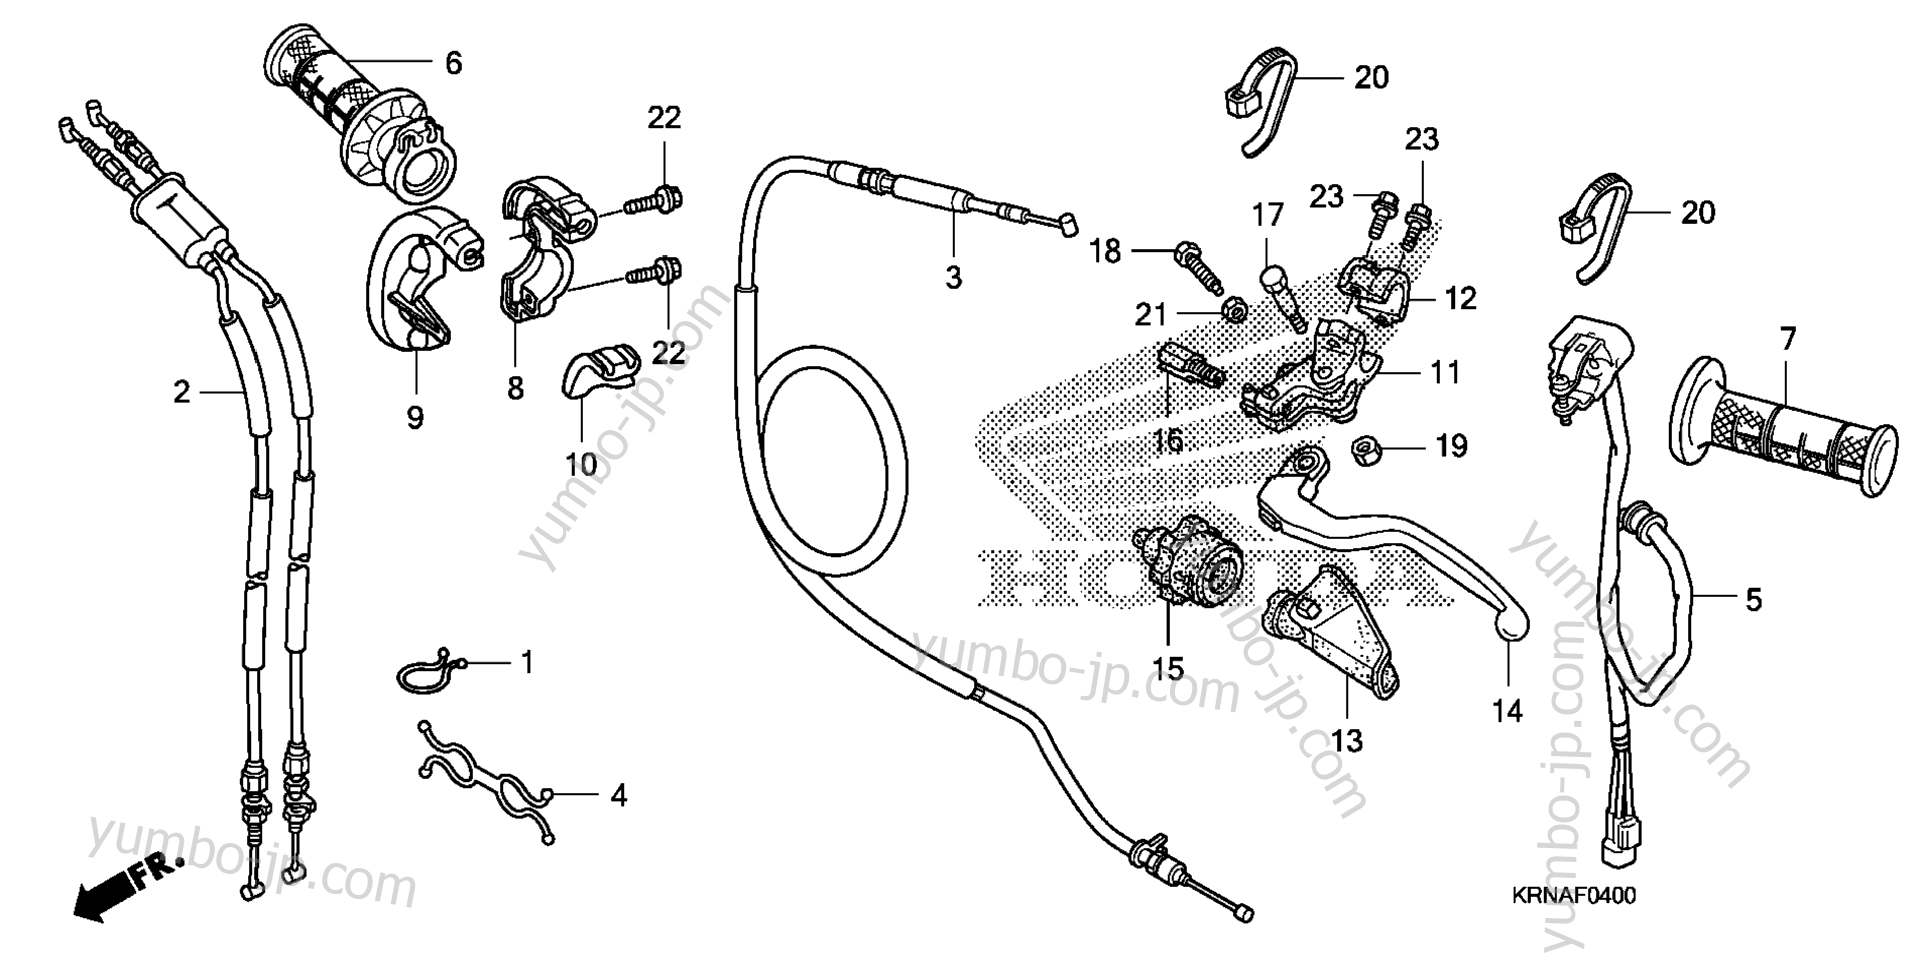 HANDLE LEVER / SWITCH / CABLE for motorcycles HONDA CRF250R AC 2013 year